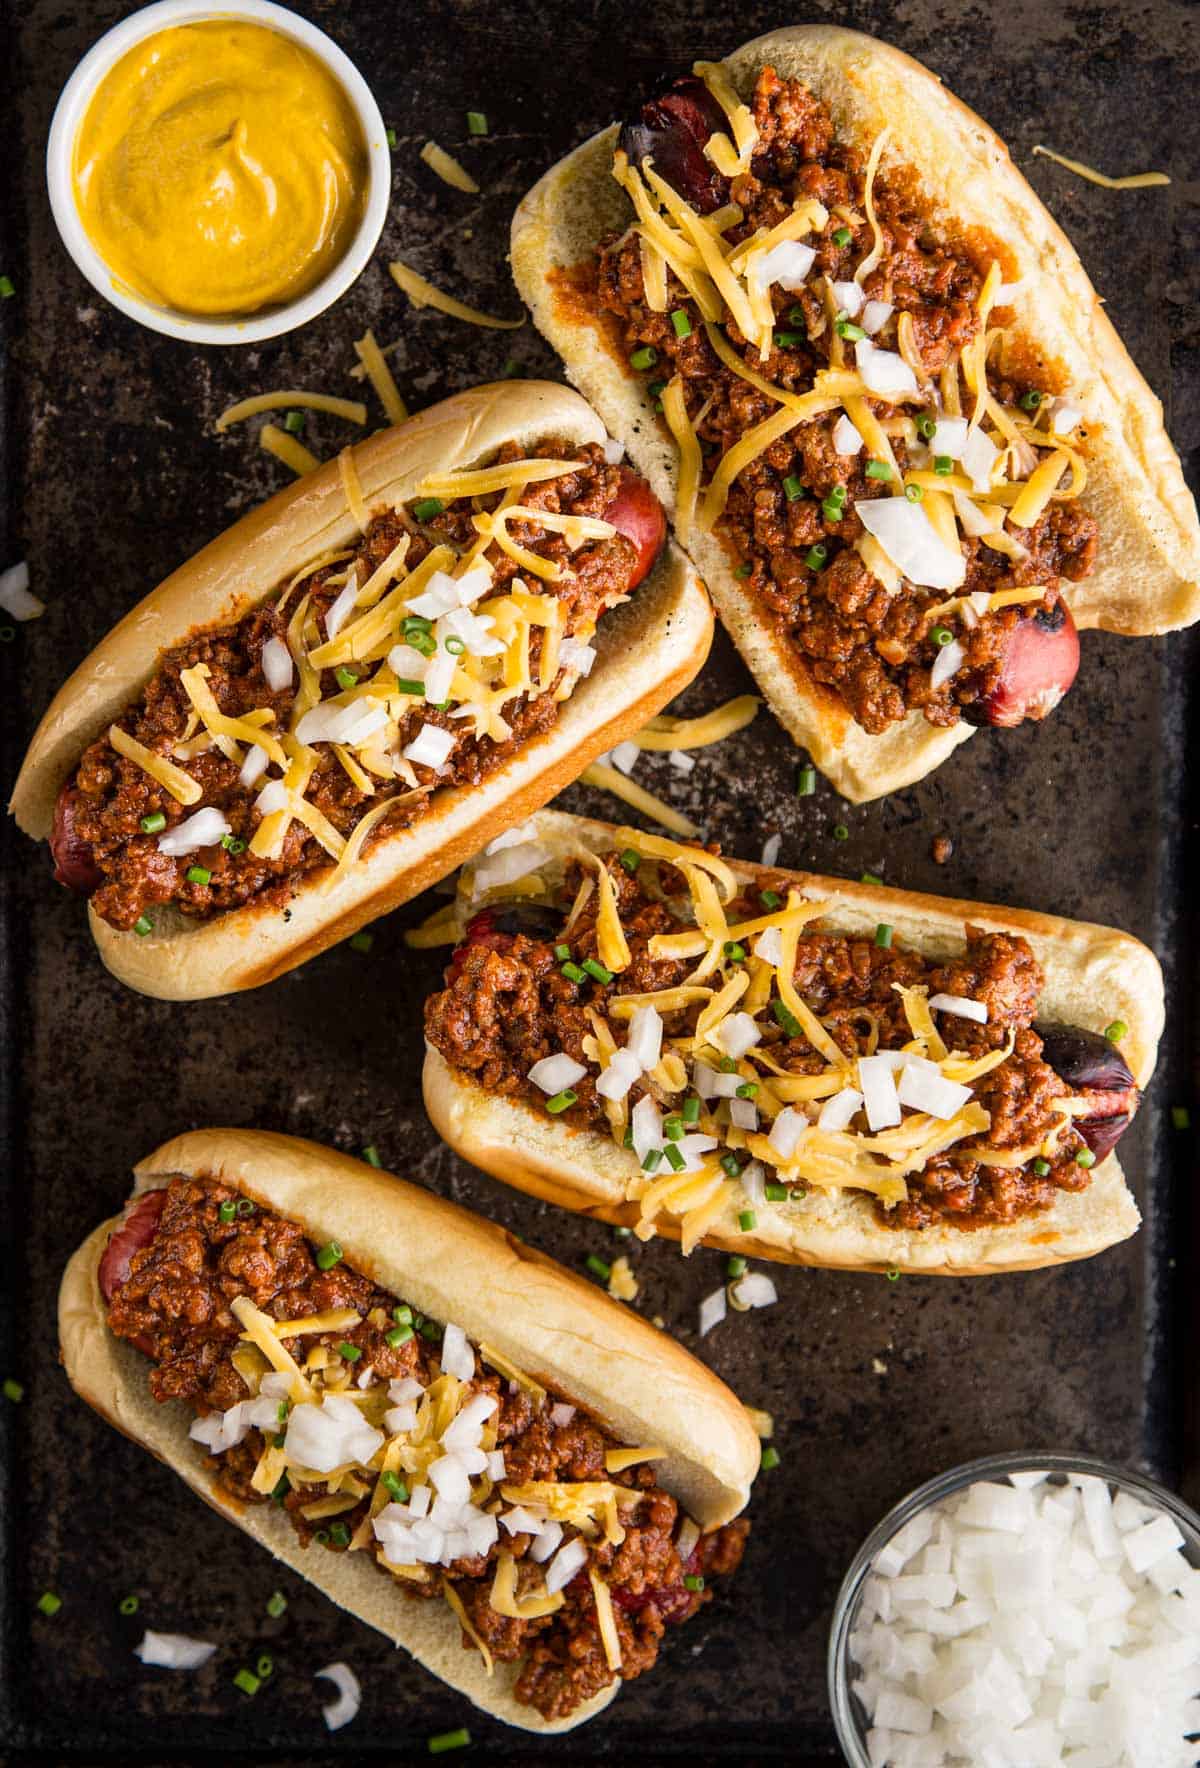 4 Chili Dogs on a platter with a side of yellow mustard and chopped onions